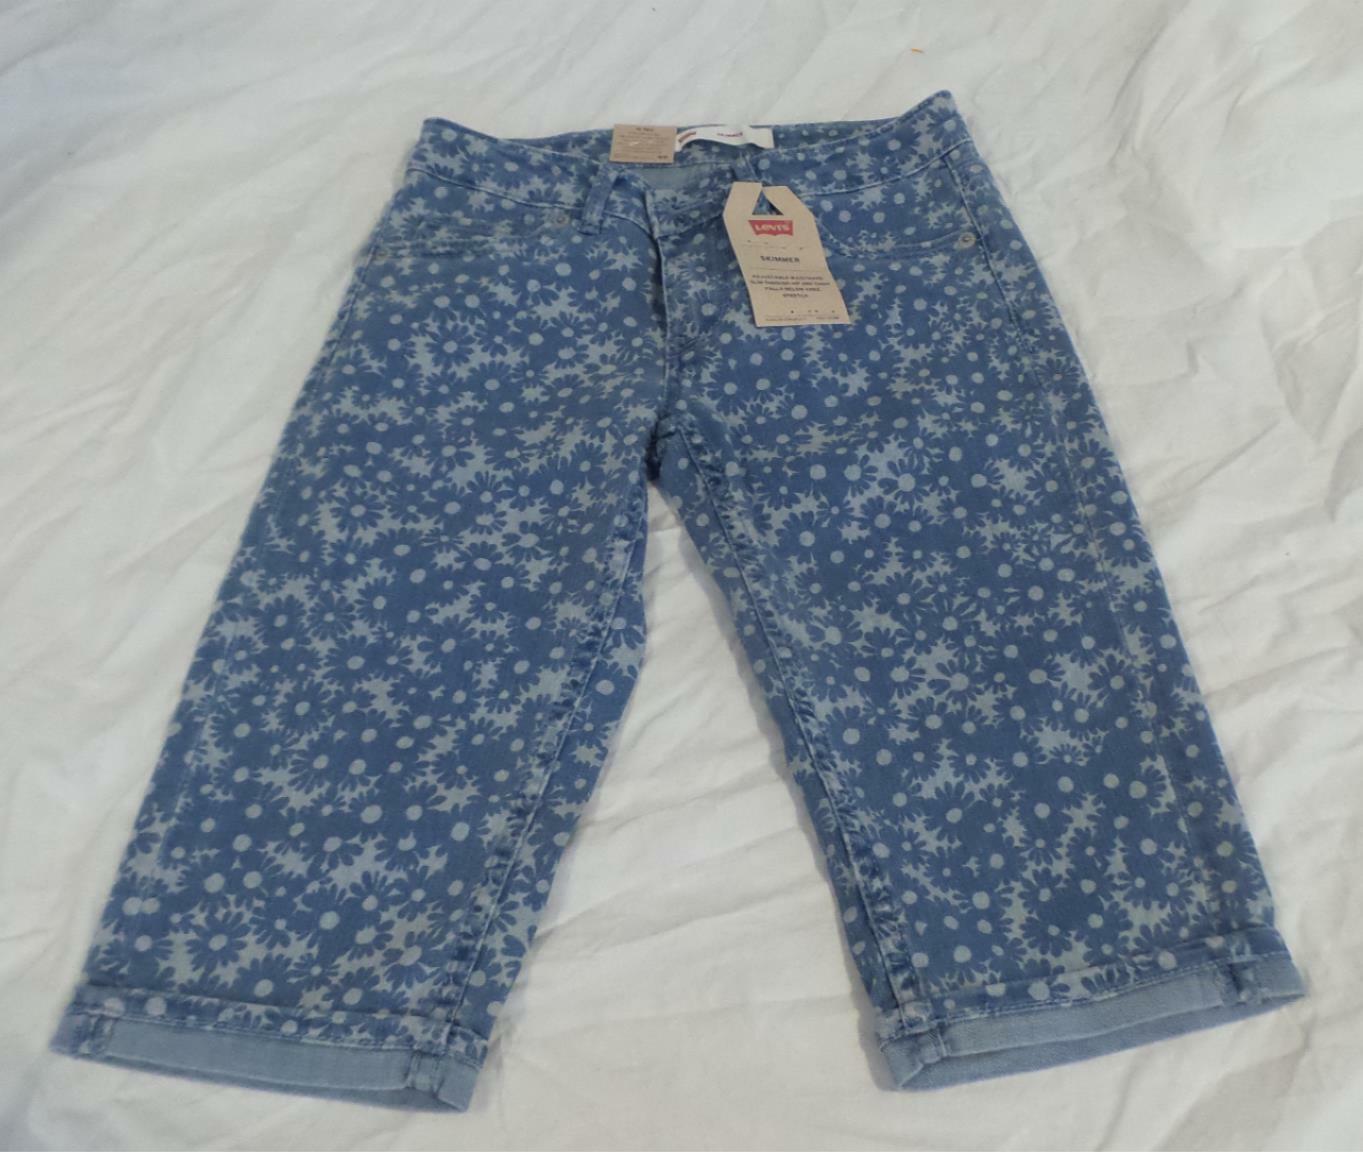 Levi's Girls Skimmer Shorts 12 Regular Blue Flowers New with Tag